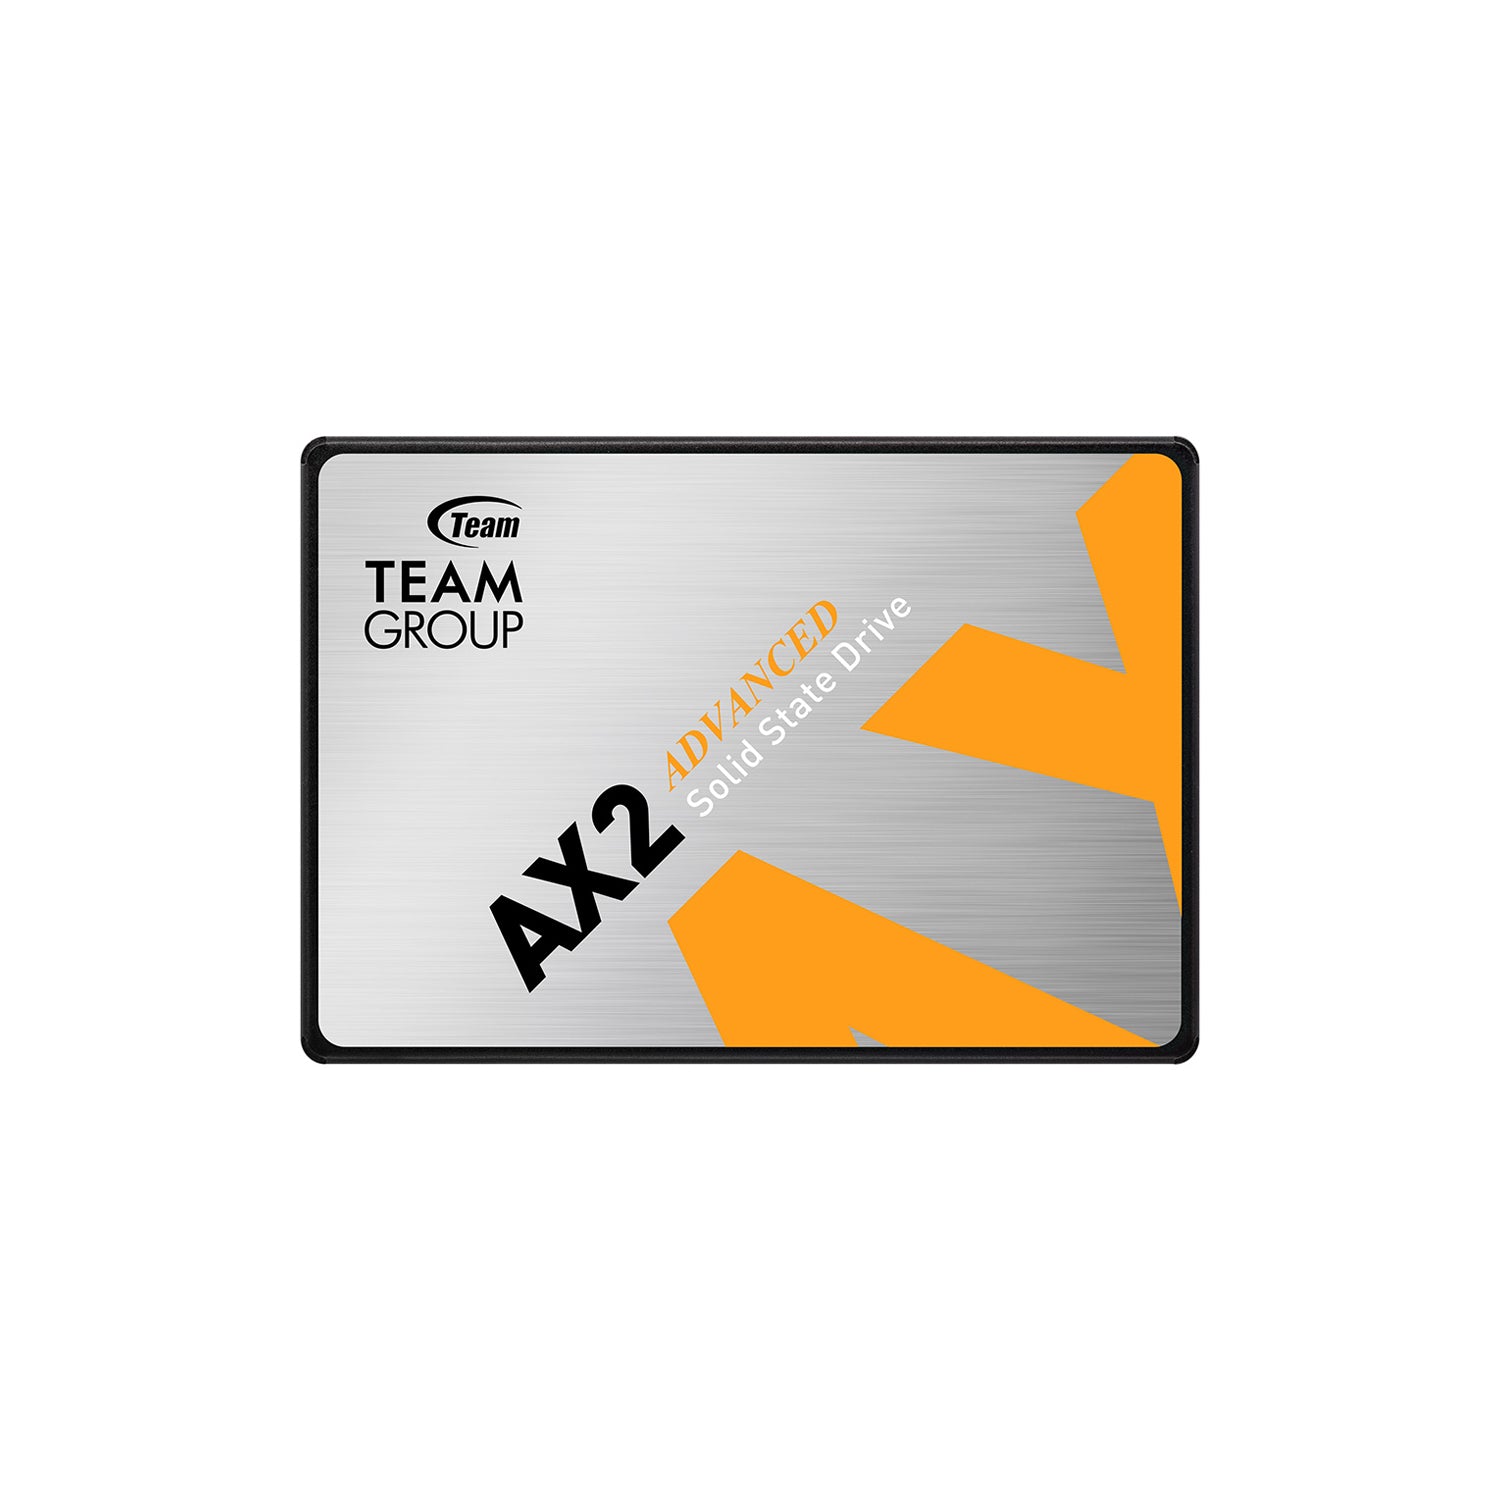 TEAMGROUP AX2 2TB Advanced Solid State Drive, 3D NAND TLC 2.5 Inch, SLC Caching technology, Read speeds up to 540MB/s, Write speeds up to 490MB/s - (T253A3002T0C101)